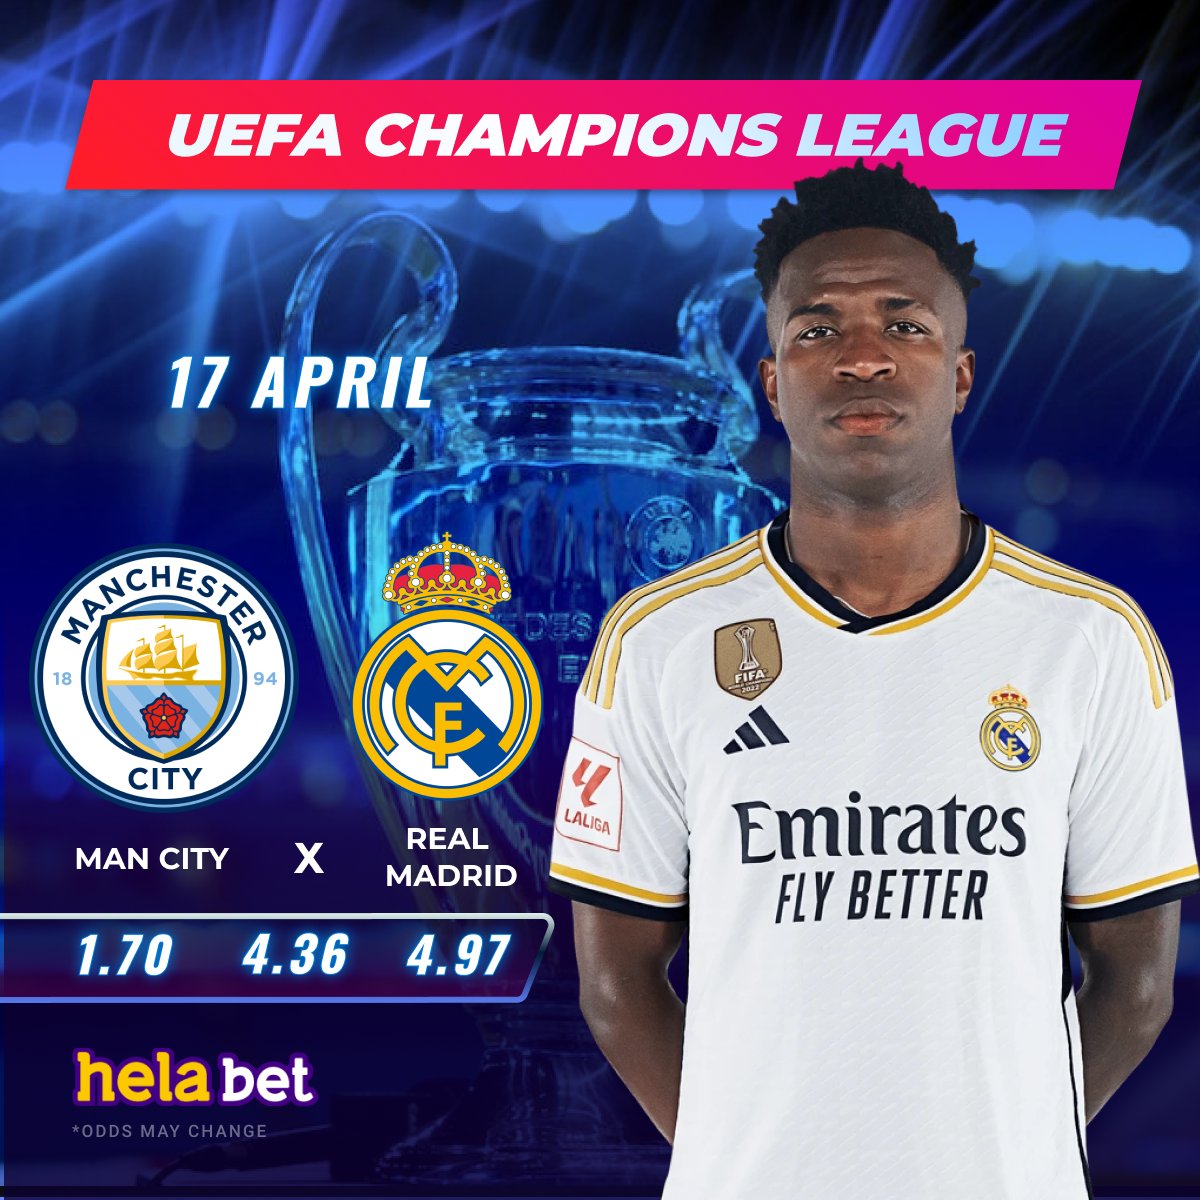 🔥 Champions League 🔥 👉 The first match ended with a score of 3-3. ❓ In whose favor will this match end? ⚽ #Mancity vs #Real Madrid 👍 Place a bet in #Helabet  👉cutt.ly/UwY8h1uG #uefa #championsleague #football